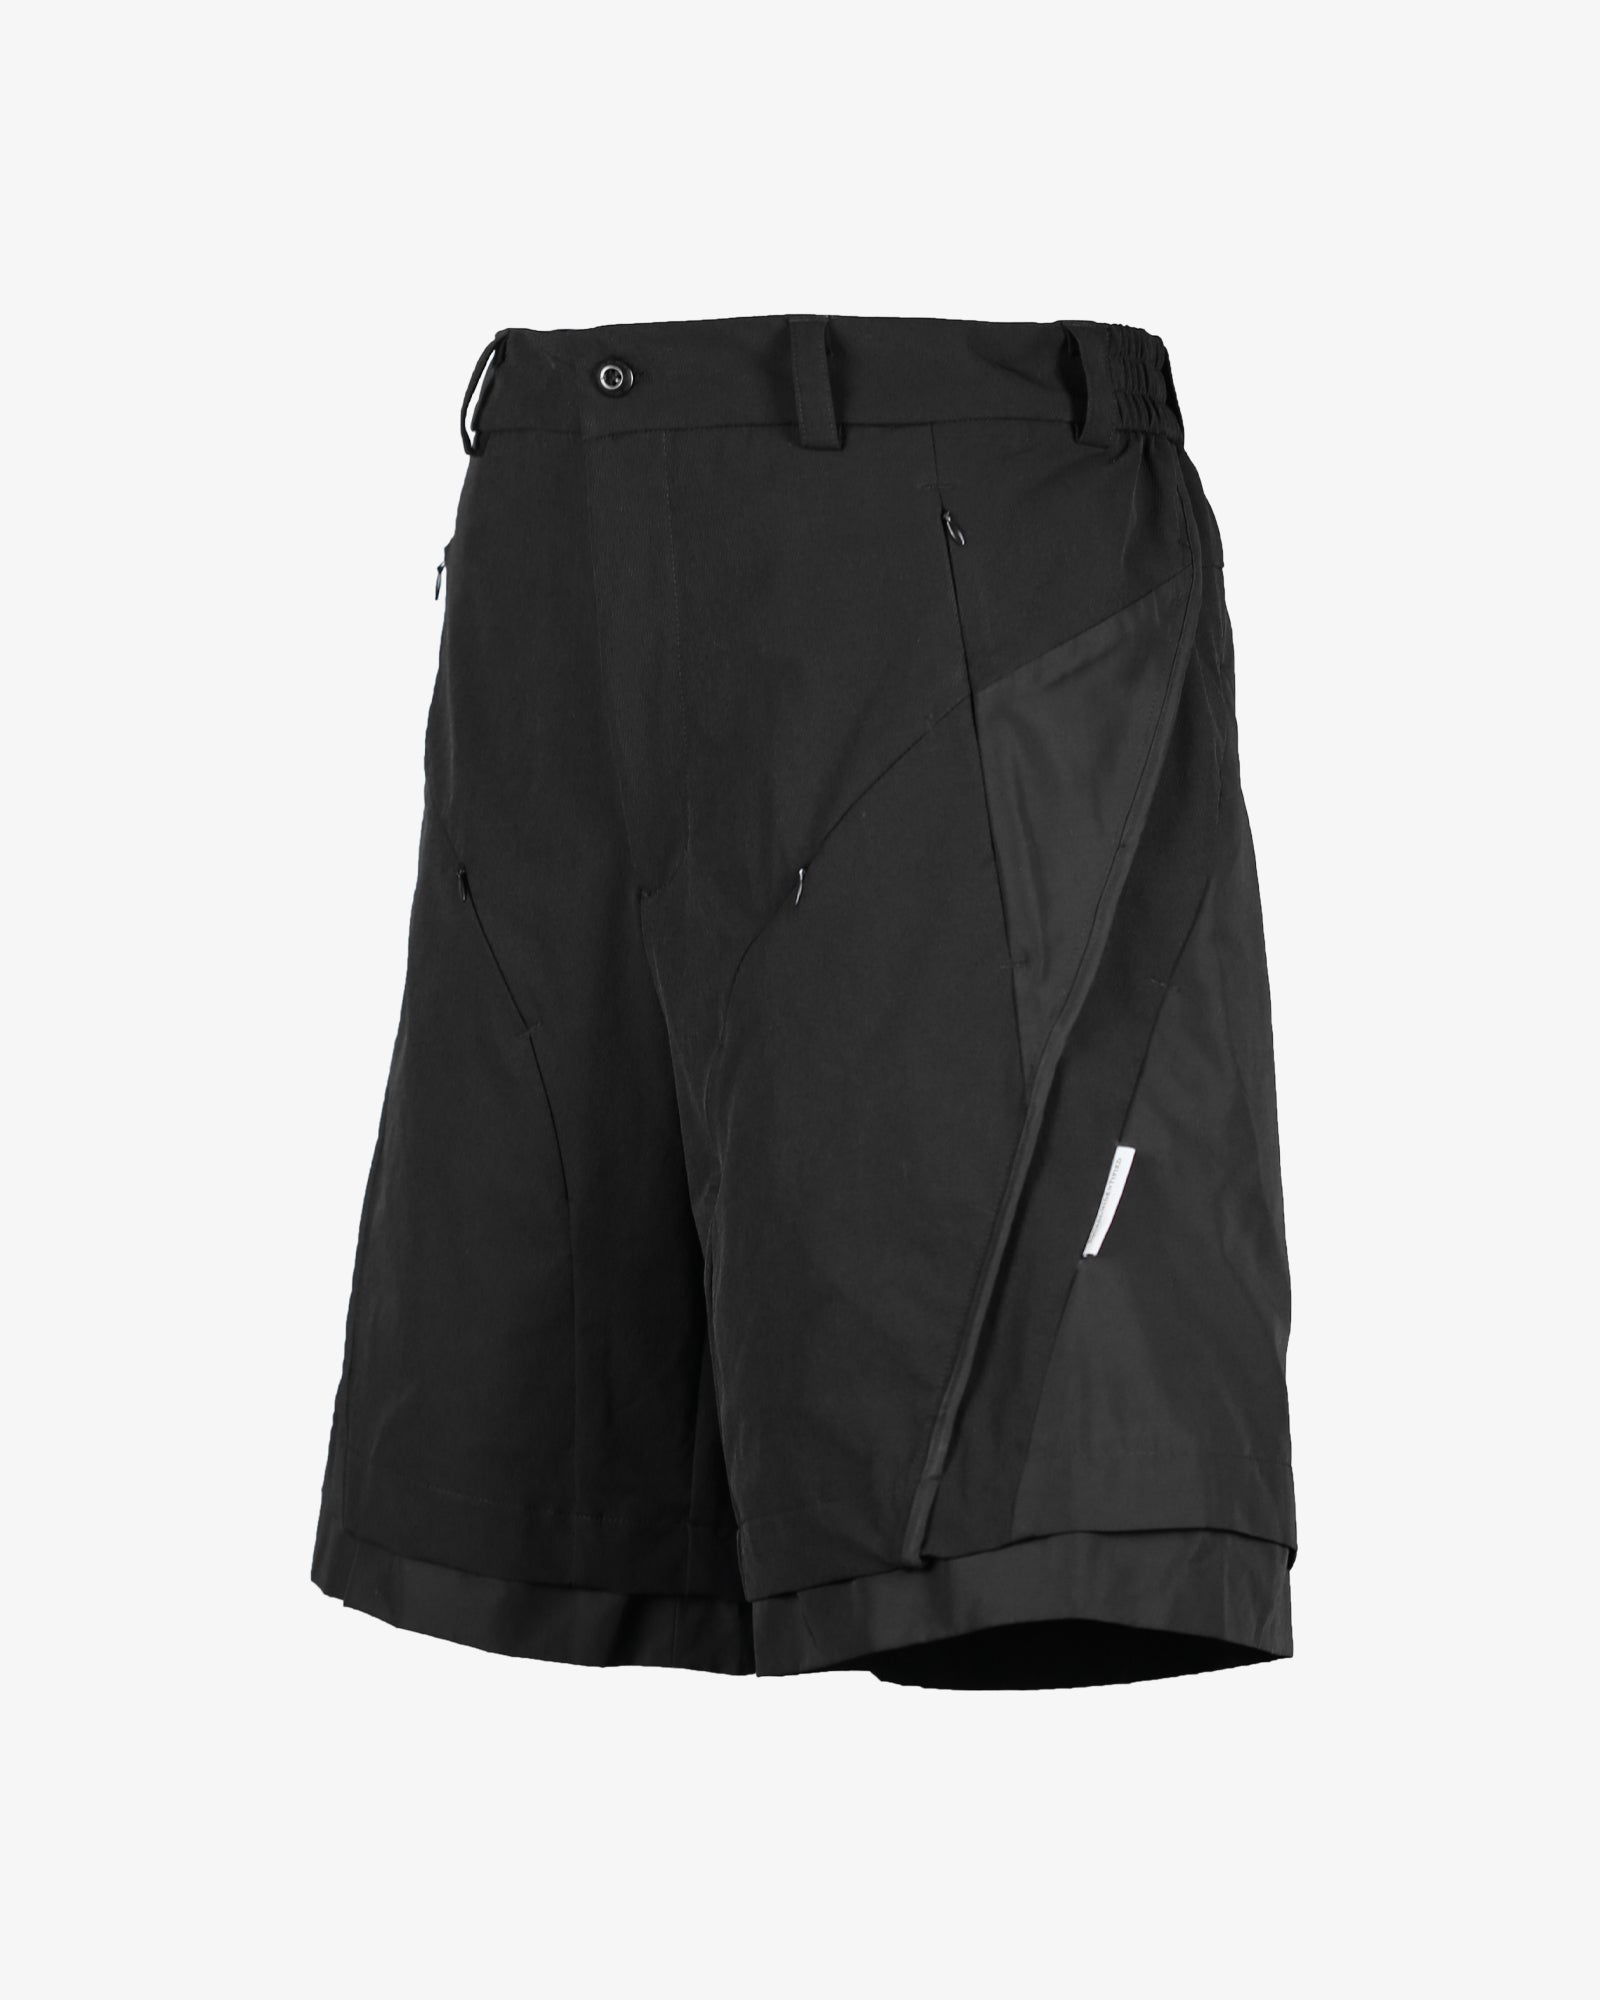 Deconstructed Dual Layered Shorts